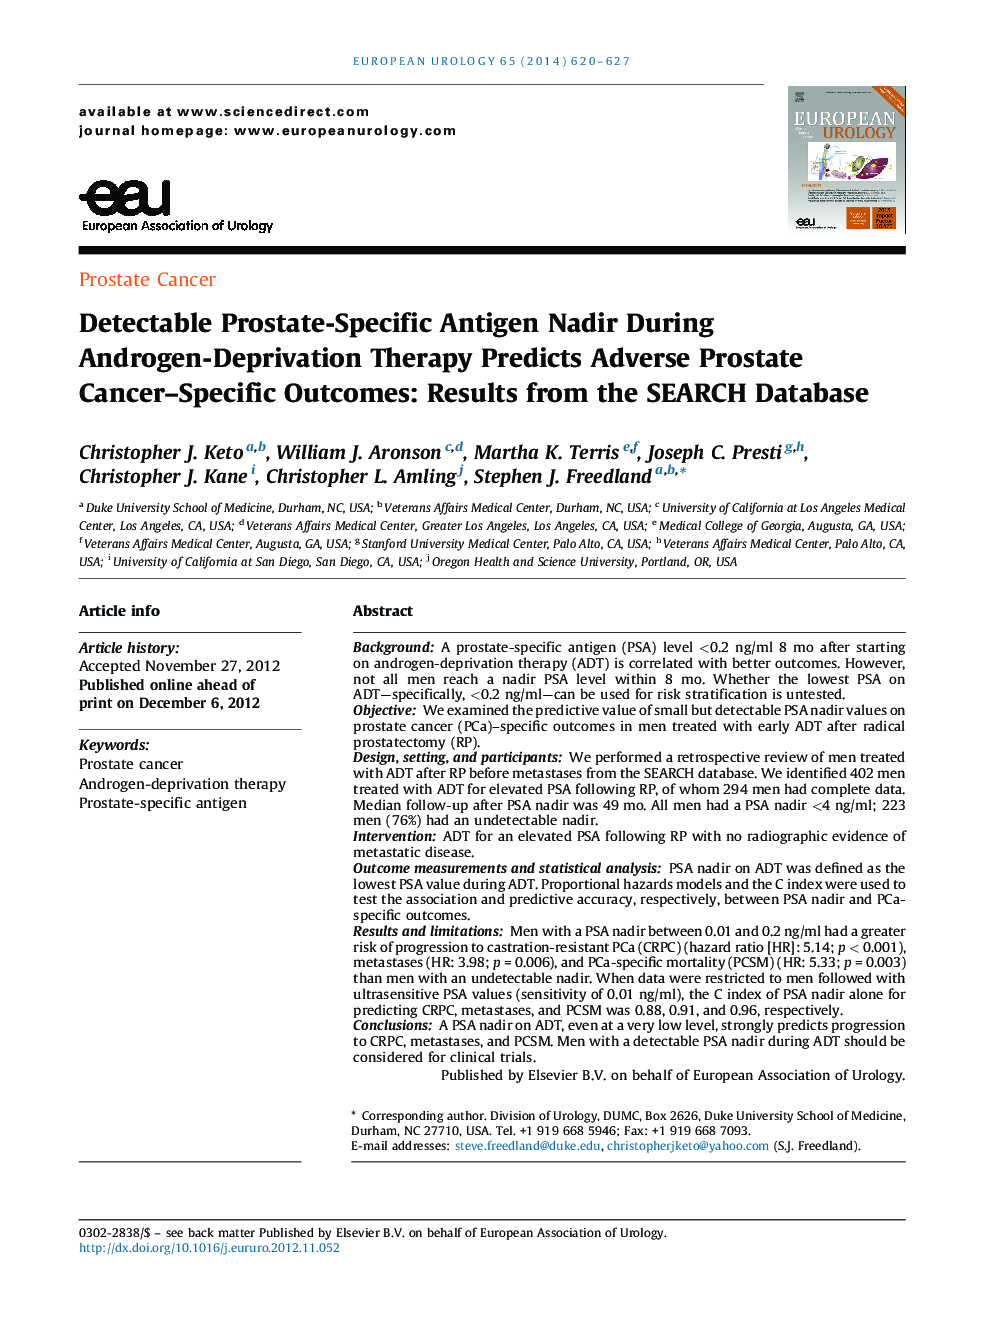 Detectable Prostate-Specific Antigen Nadir During Androgen-Deprivation Therapy Predicts Adverse Prostate Cancer-Specific Outcomes: Results from the SEARCH Database